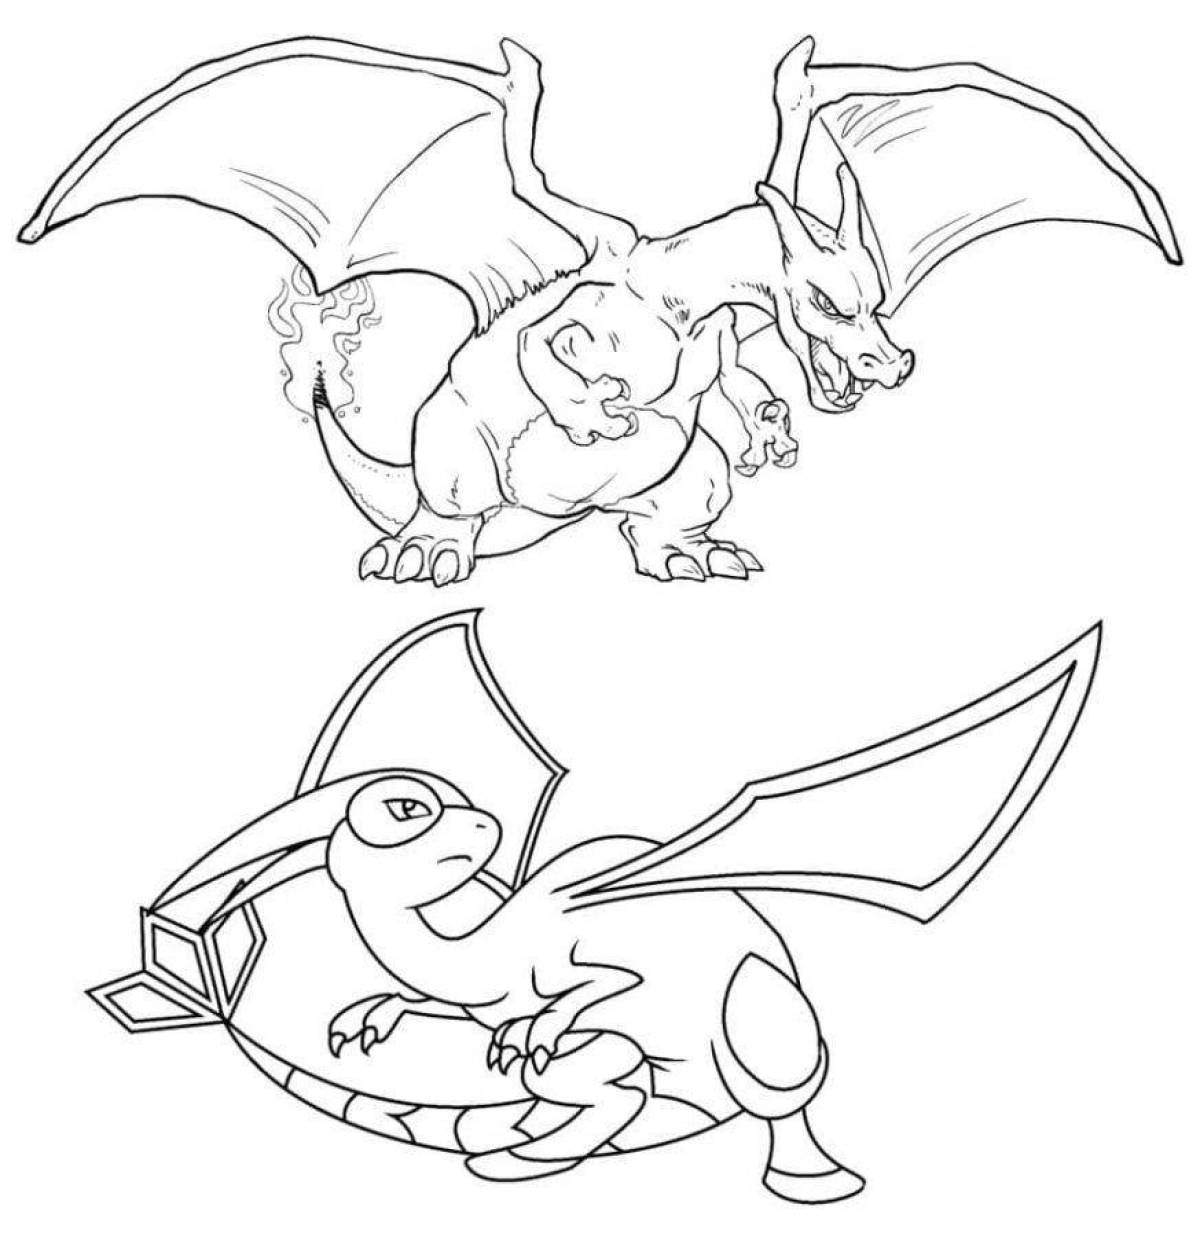 Great charizard coloring book